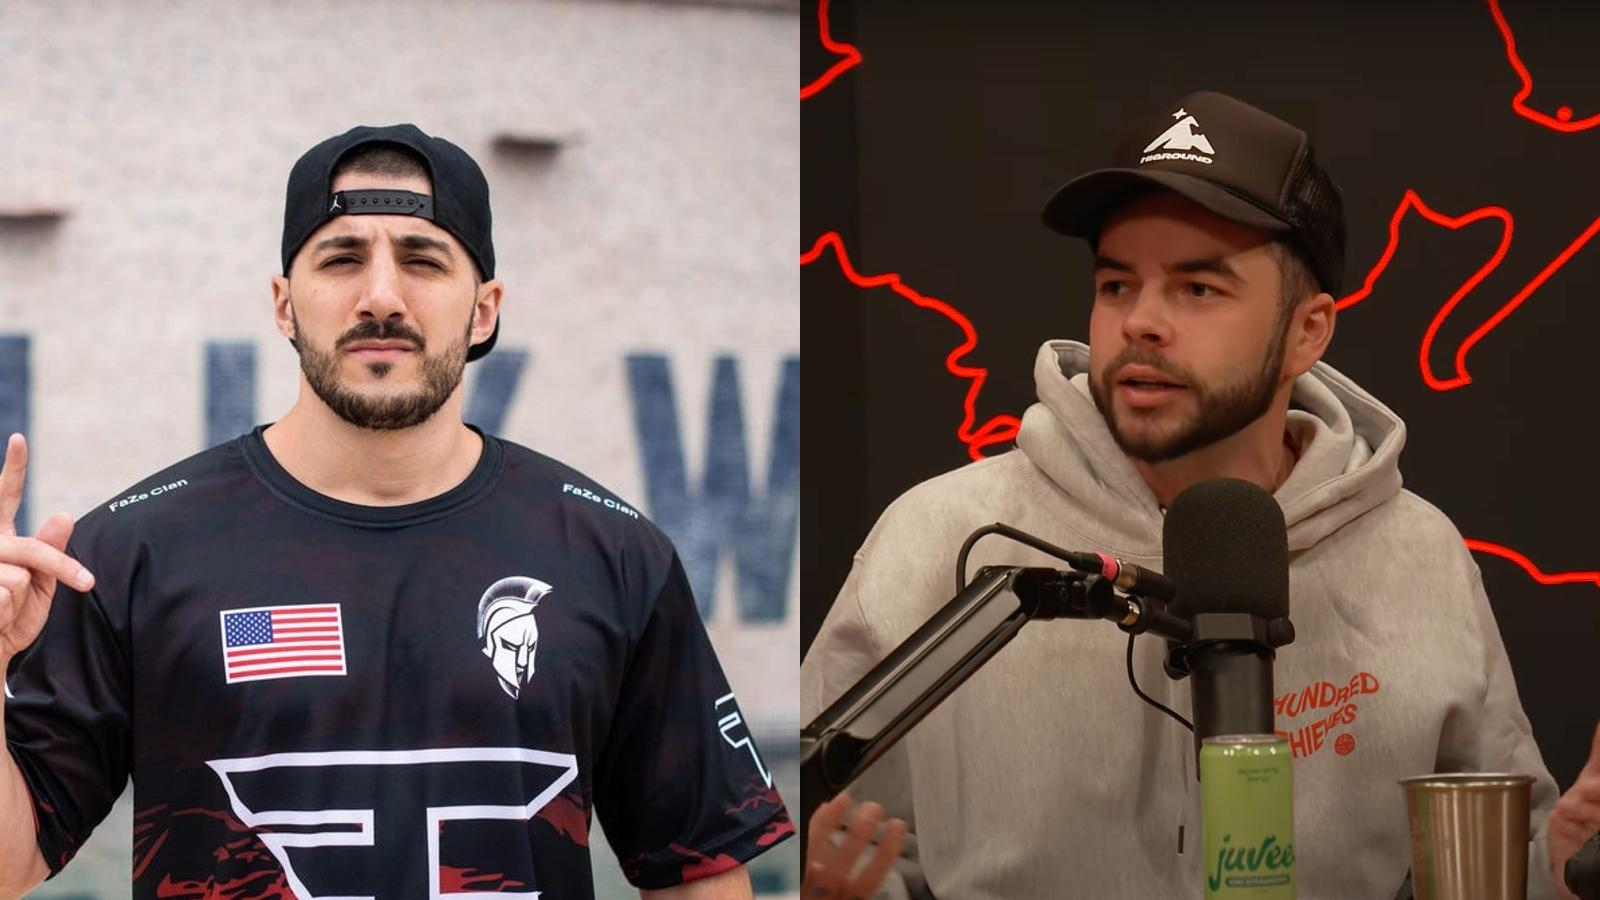 Nickmercs and Nadeshot side by side picture